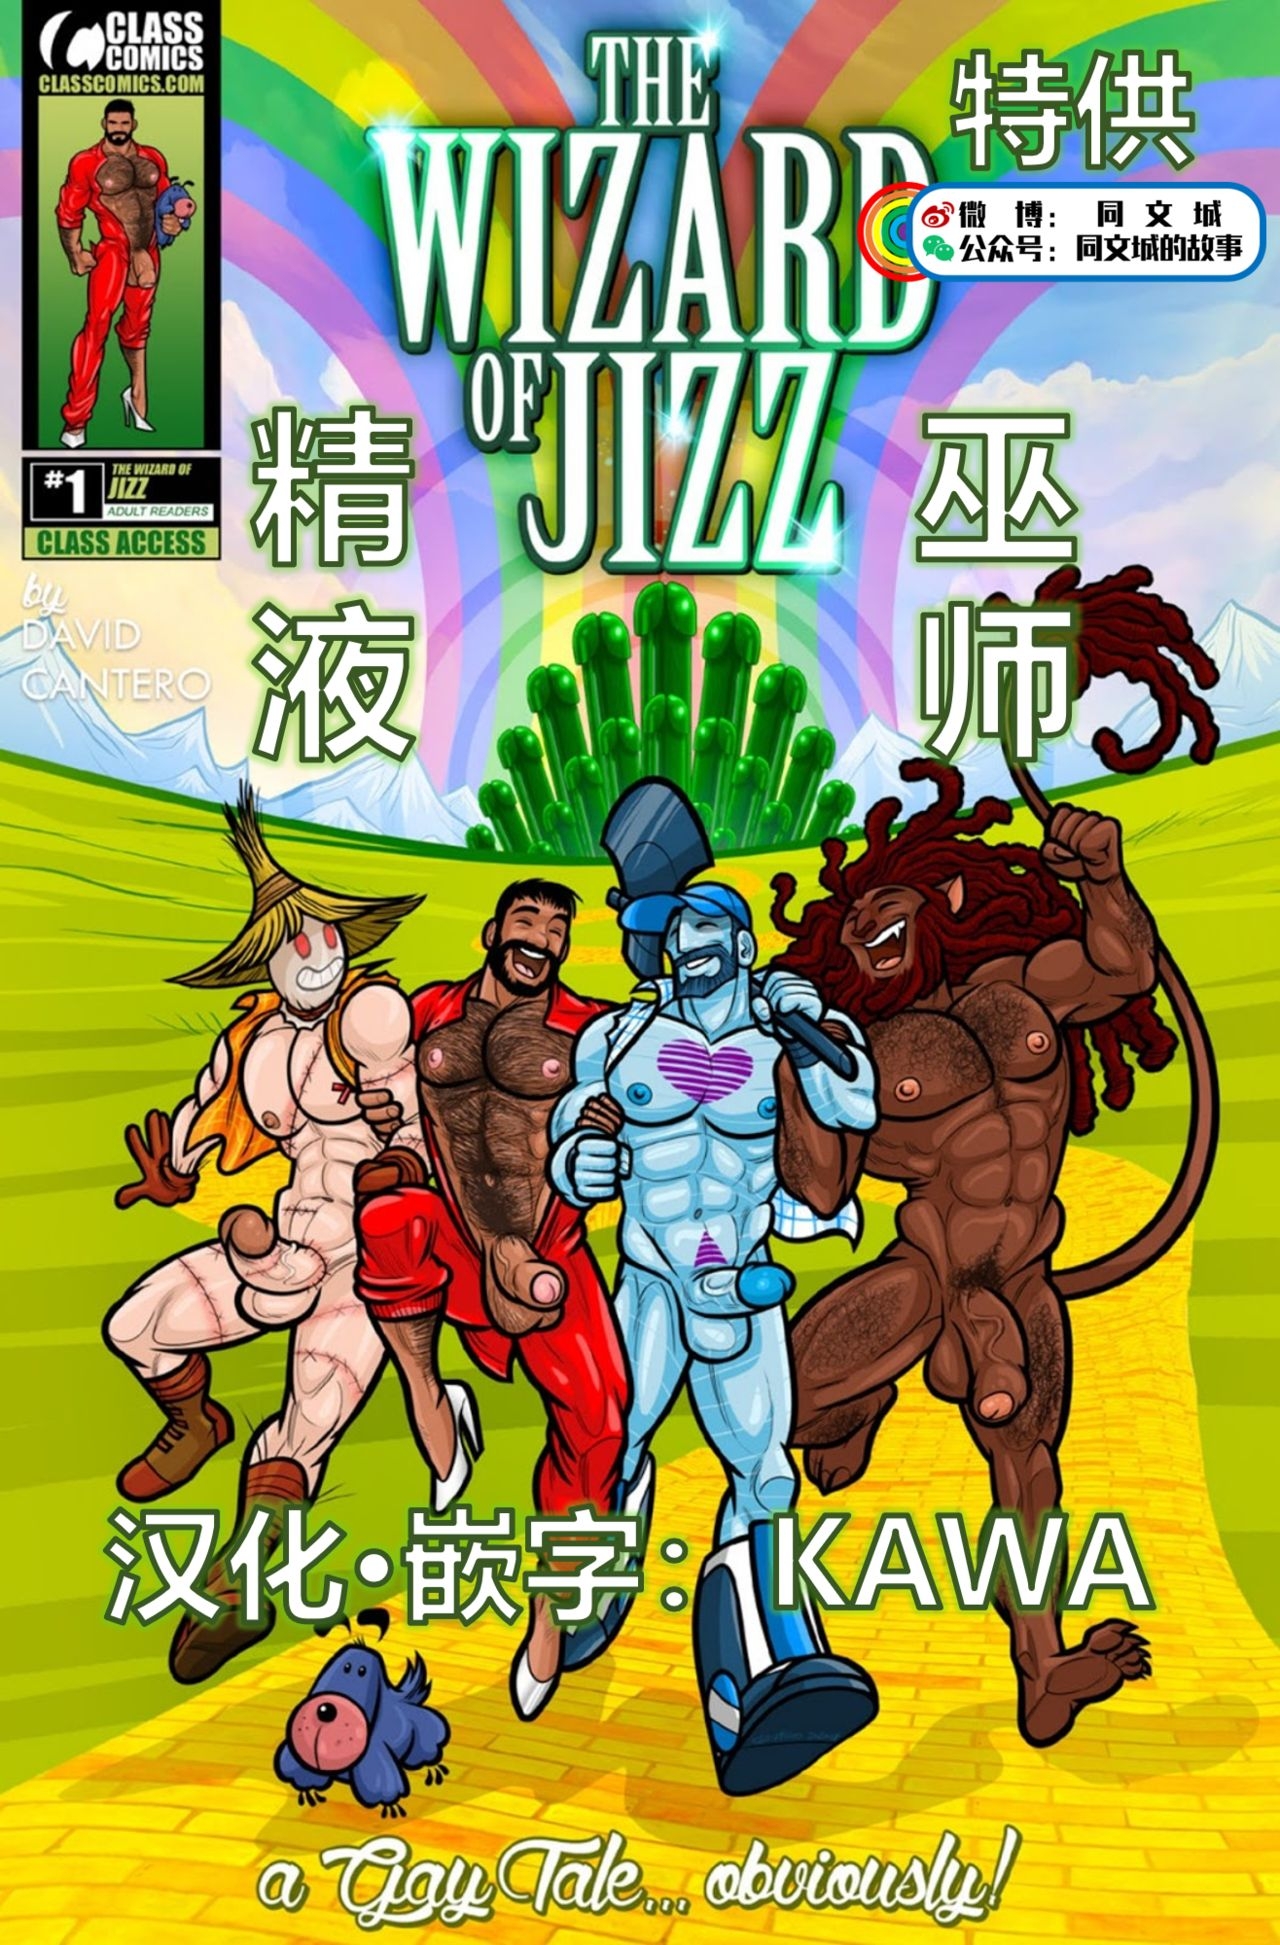 David Cantero – A Gay Tale Wizard of Jizz（Chinese） 0